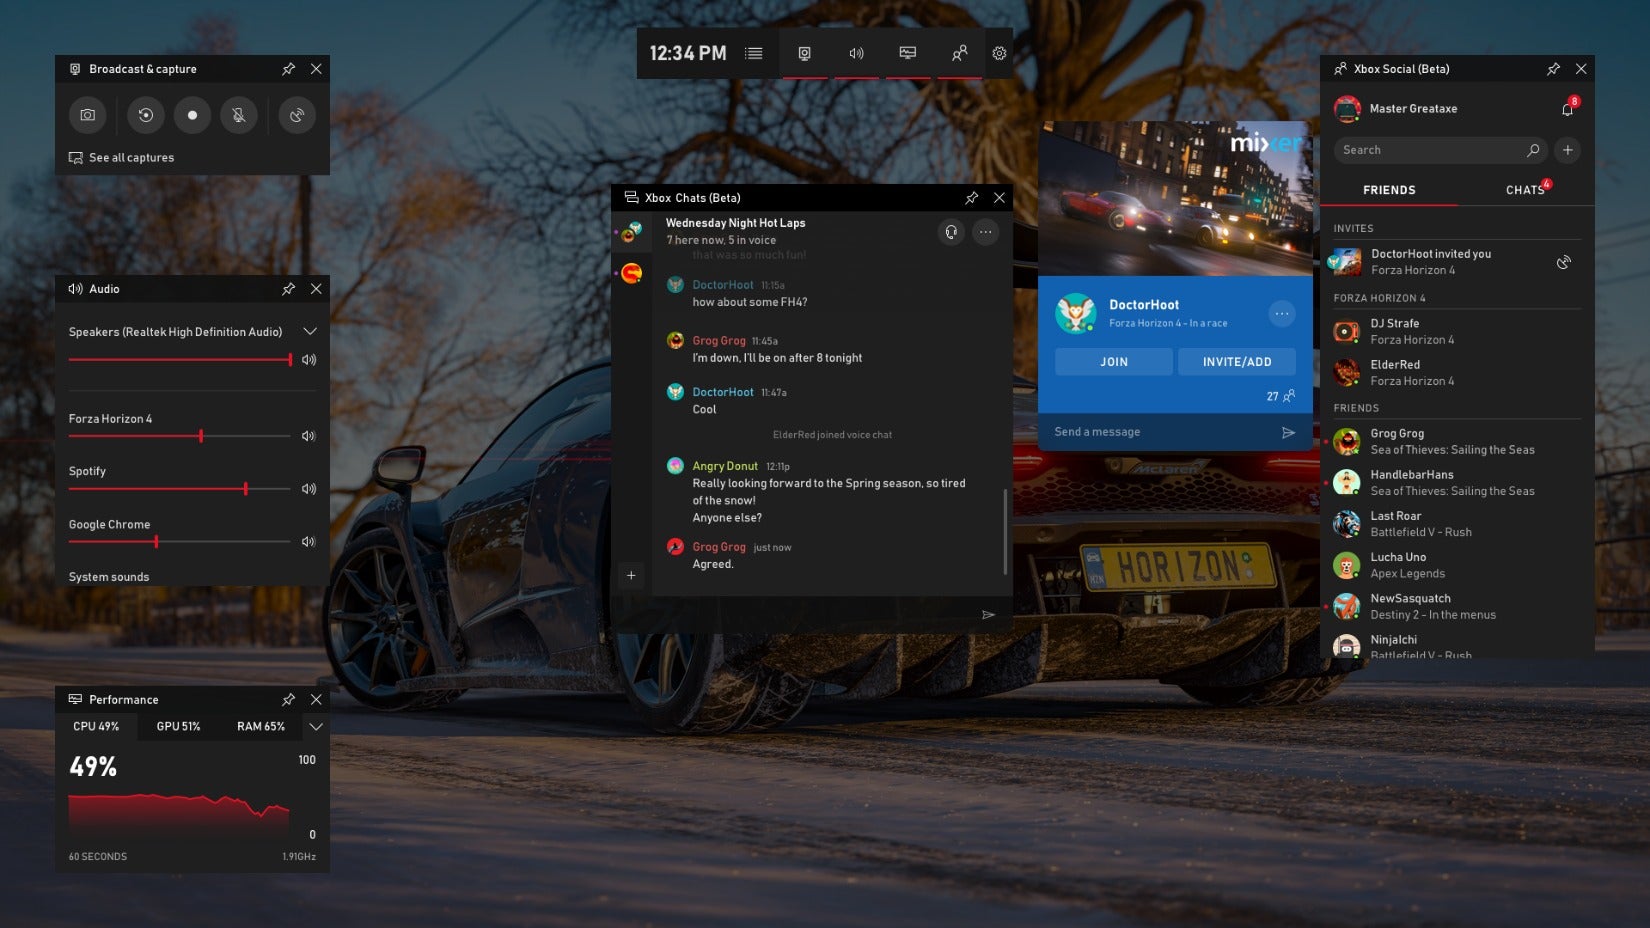 Microsoft Powers Up Windows 10 S Game Bar With Truly Useful Tools